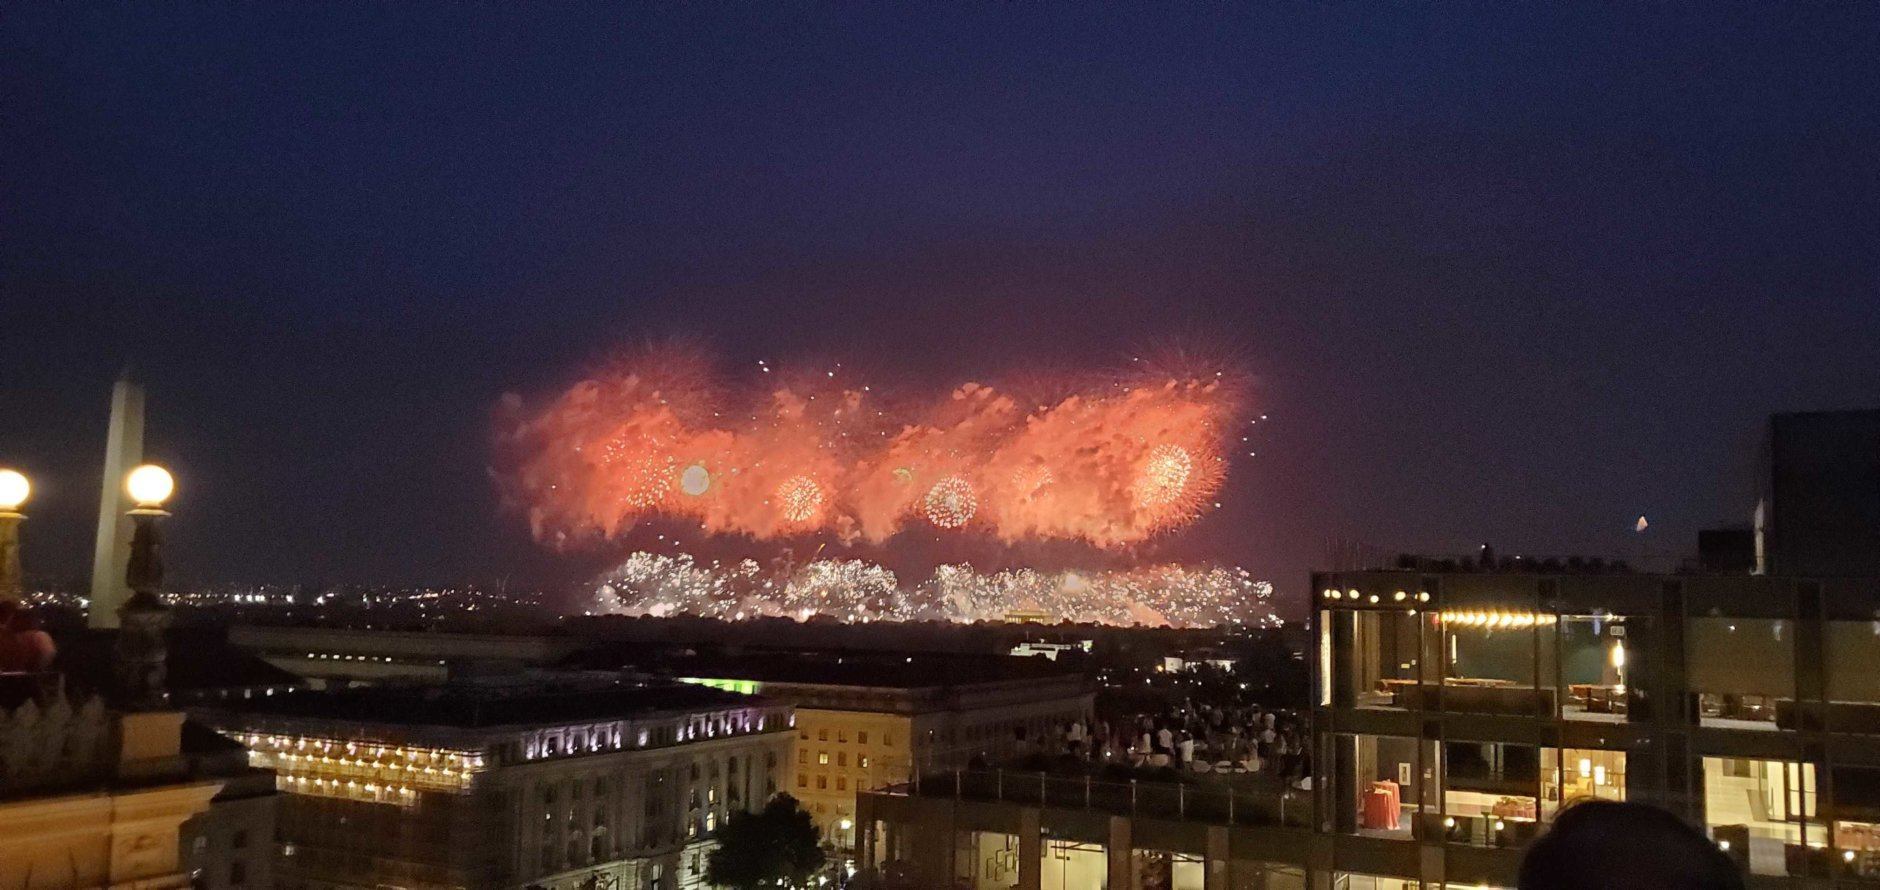 Two of the U.S. biggest pyrotechnic companies, Phantom Fireworks and Fireworks by Grucci, donated their services and products to this year’s show. (WTOP/Jared Ruderman)